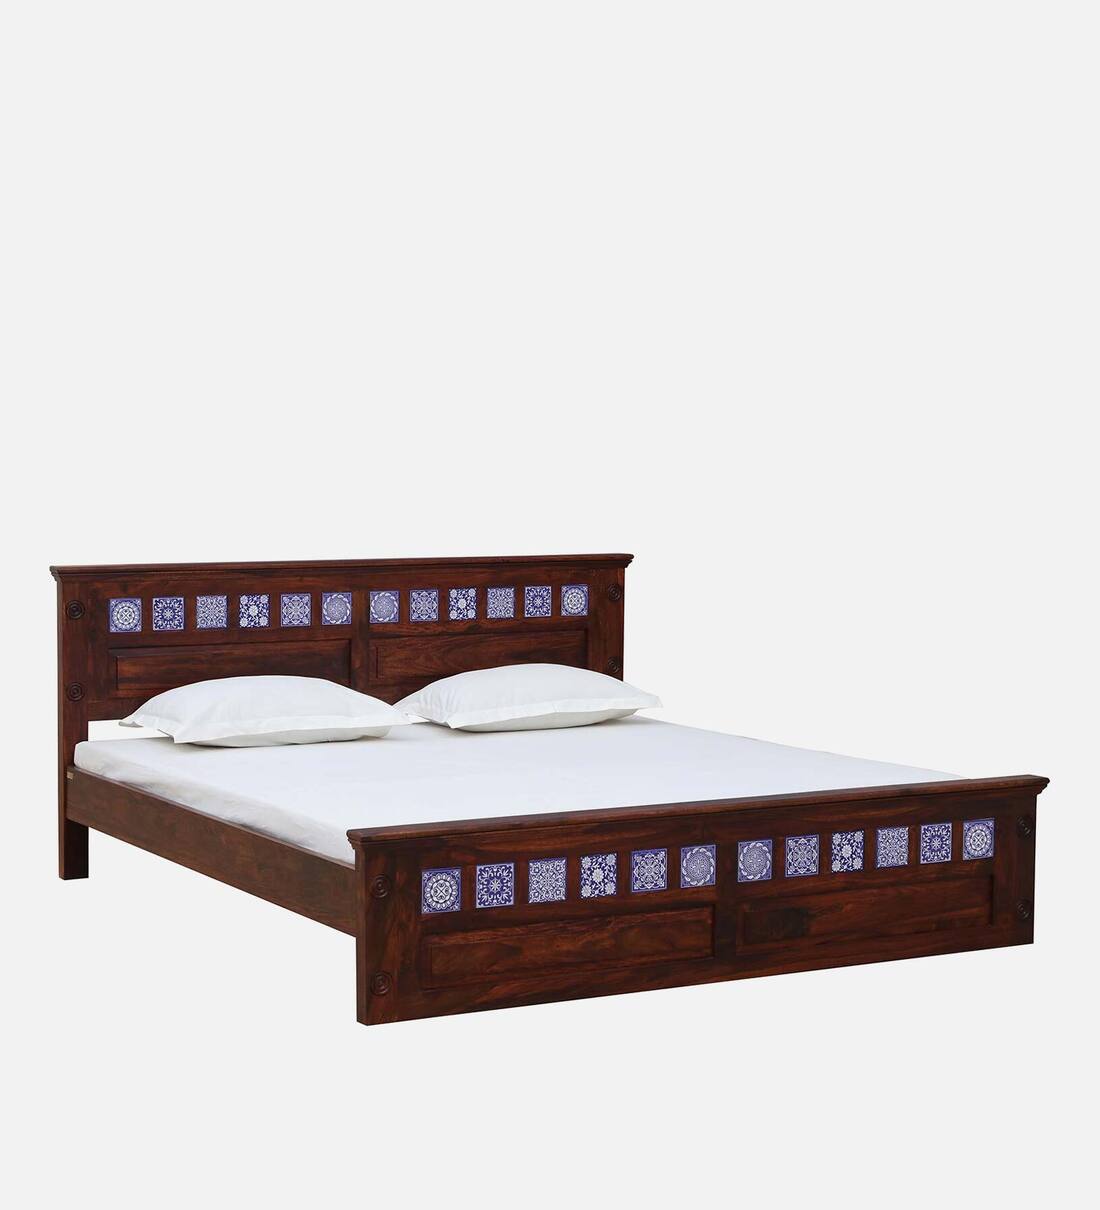 Sheesham Wood King Size Bed In Scratch Resistant Honey Oak Finish with Tiles on Footrest